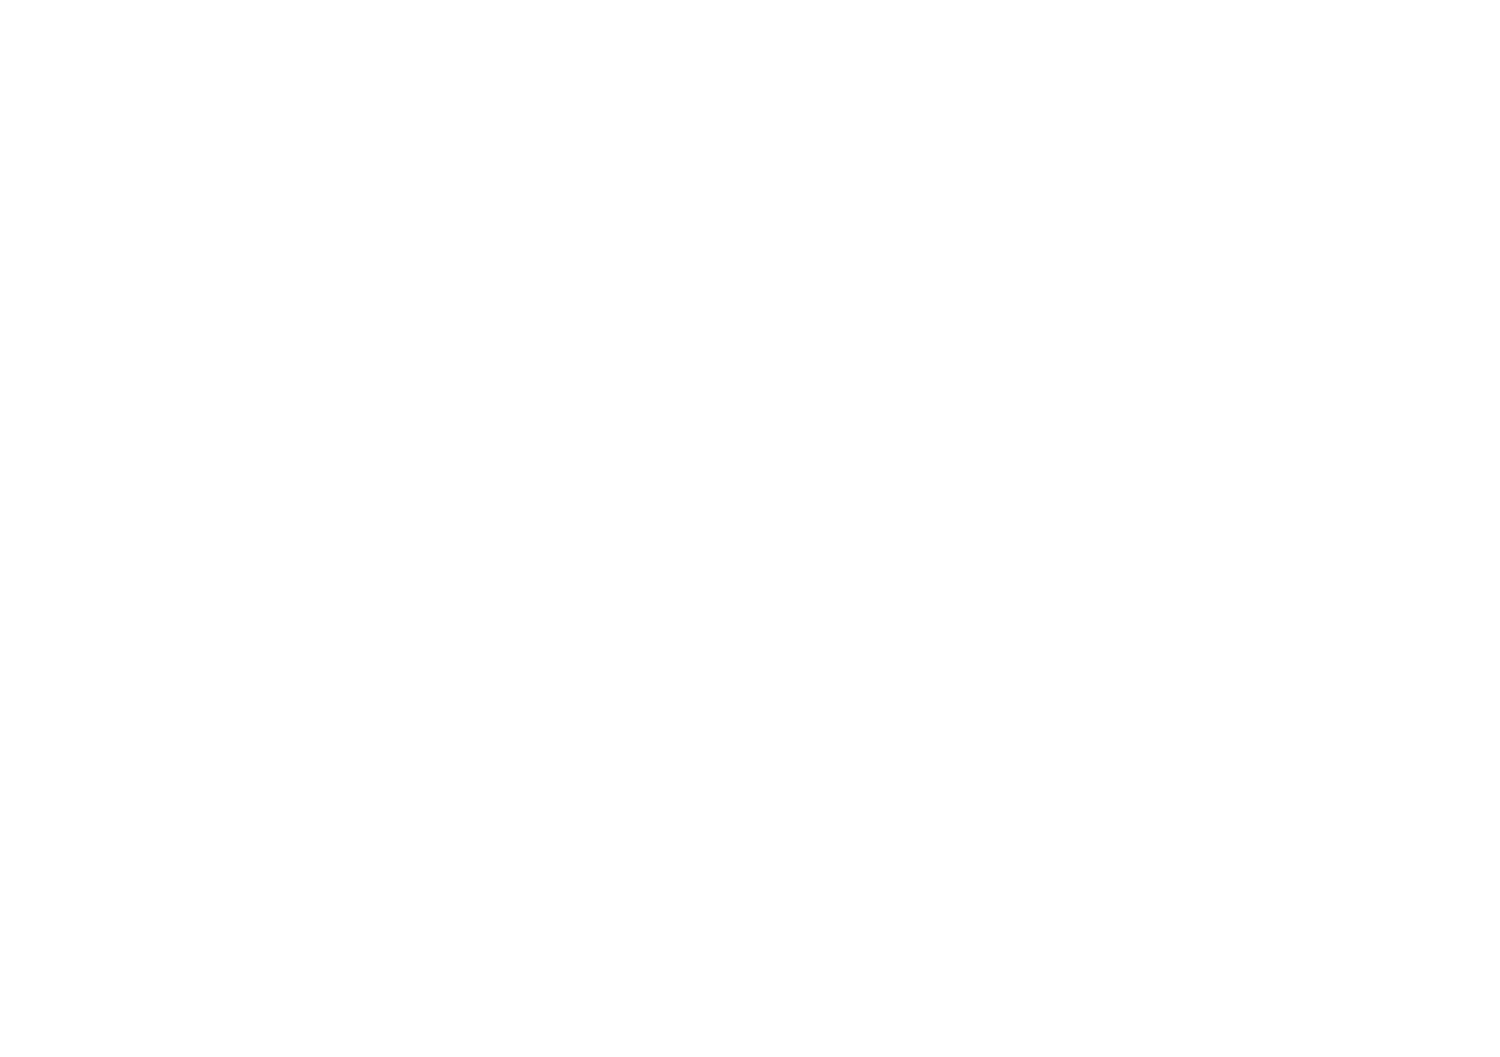 heed - Artists Booking Agency